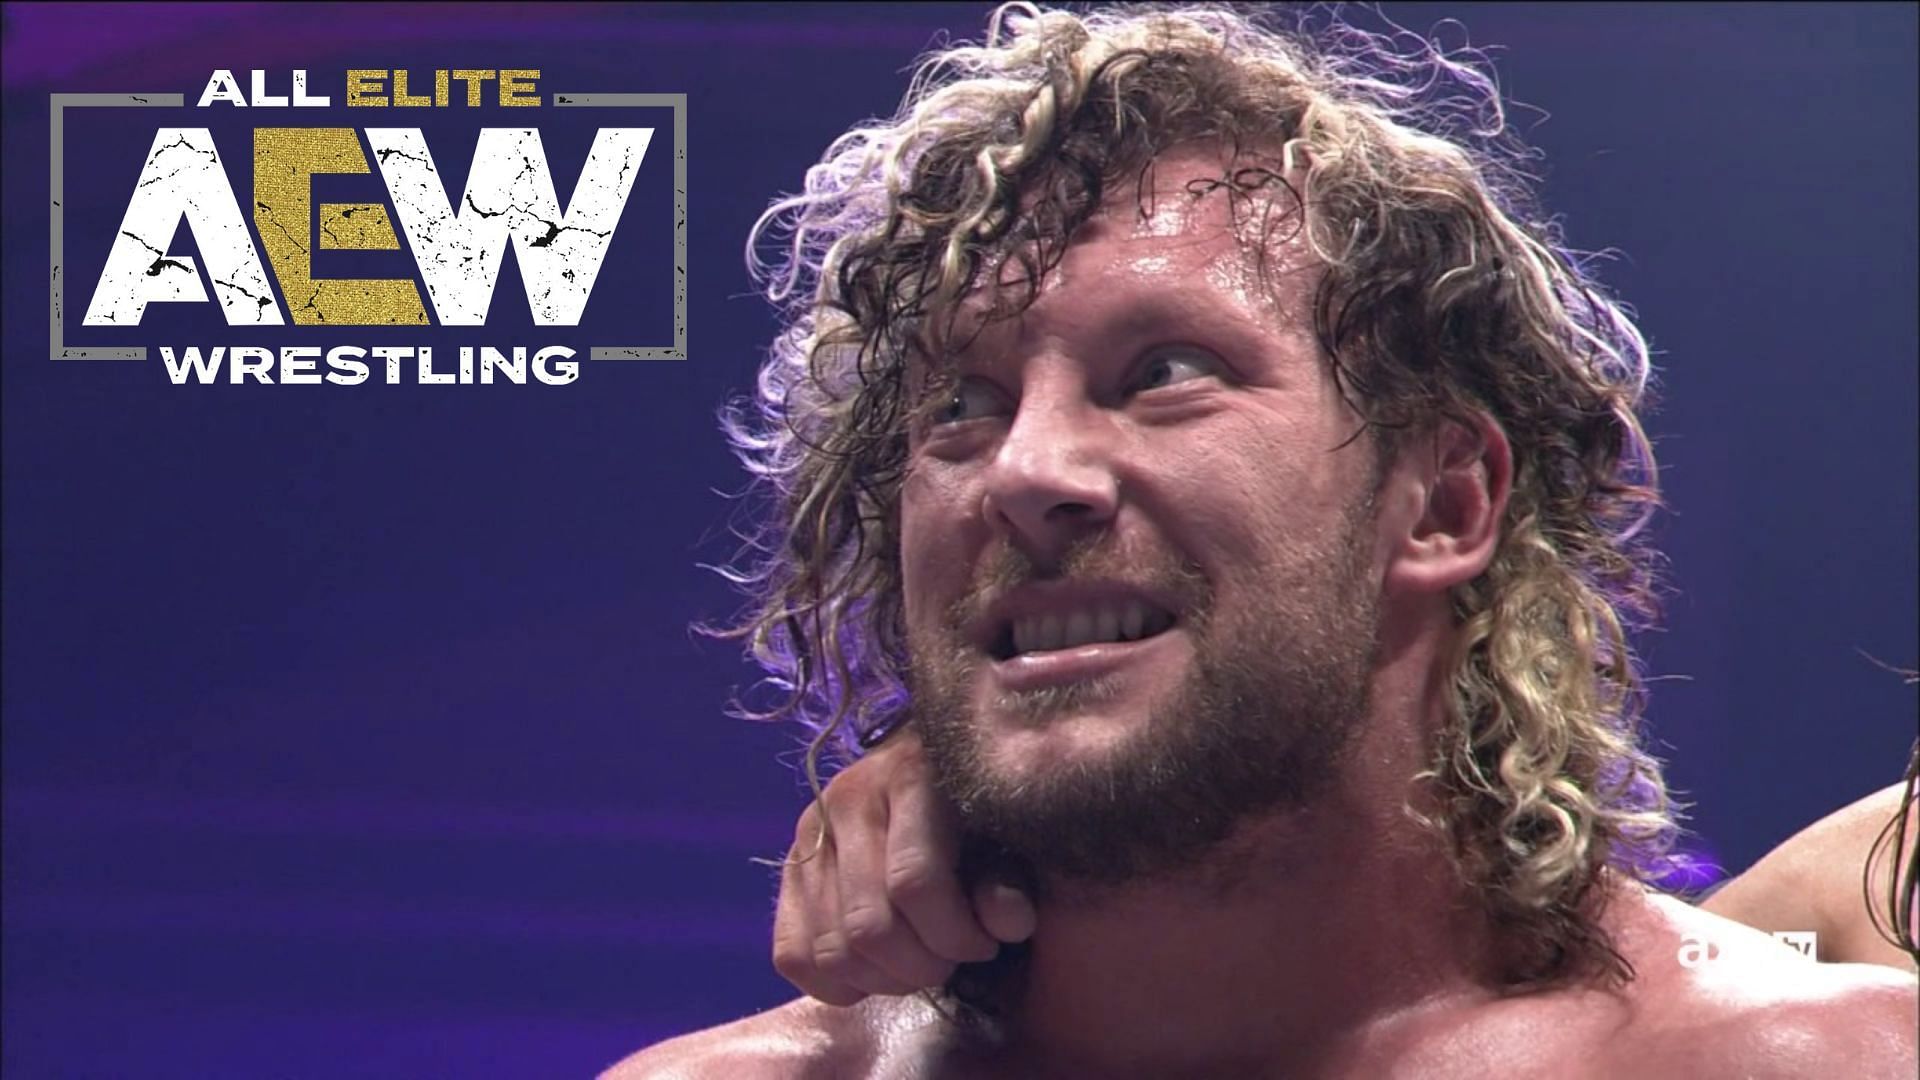 Is Kenny Omega truly one of the best wrestlers in the world?